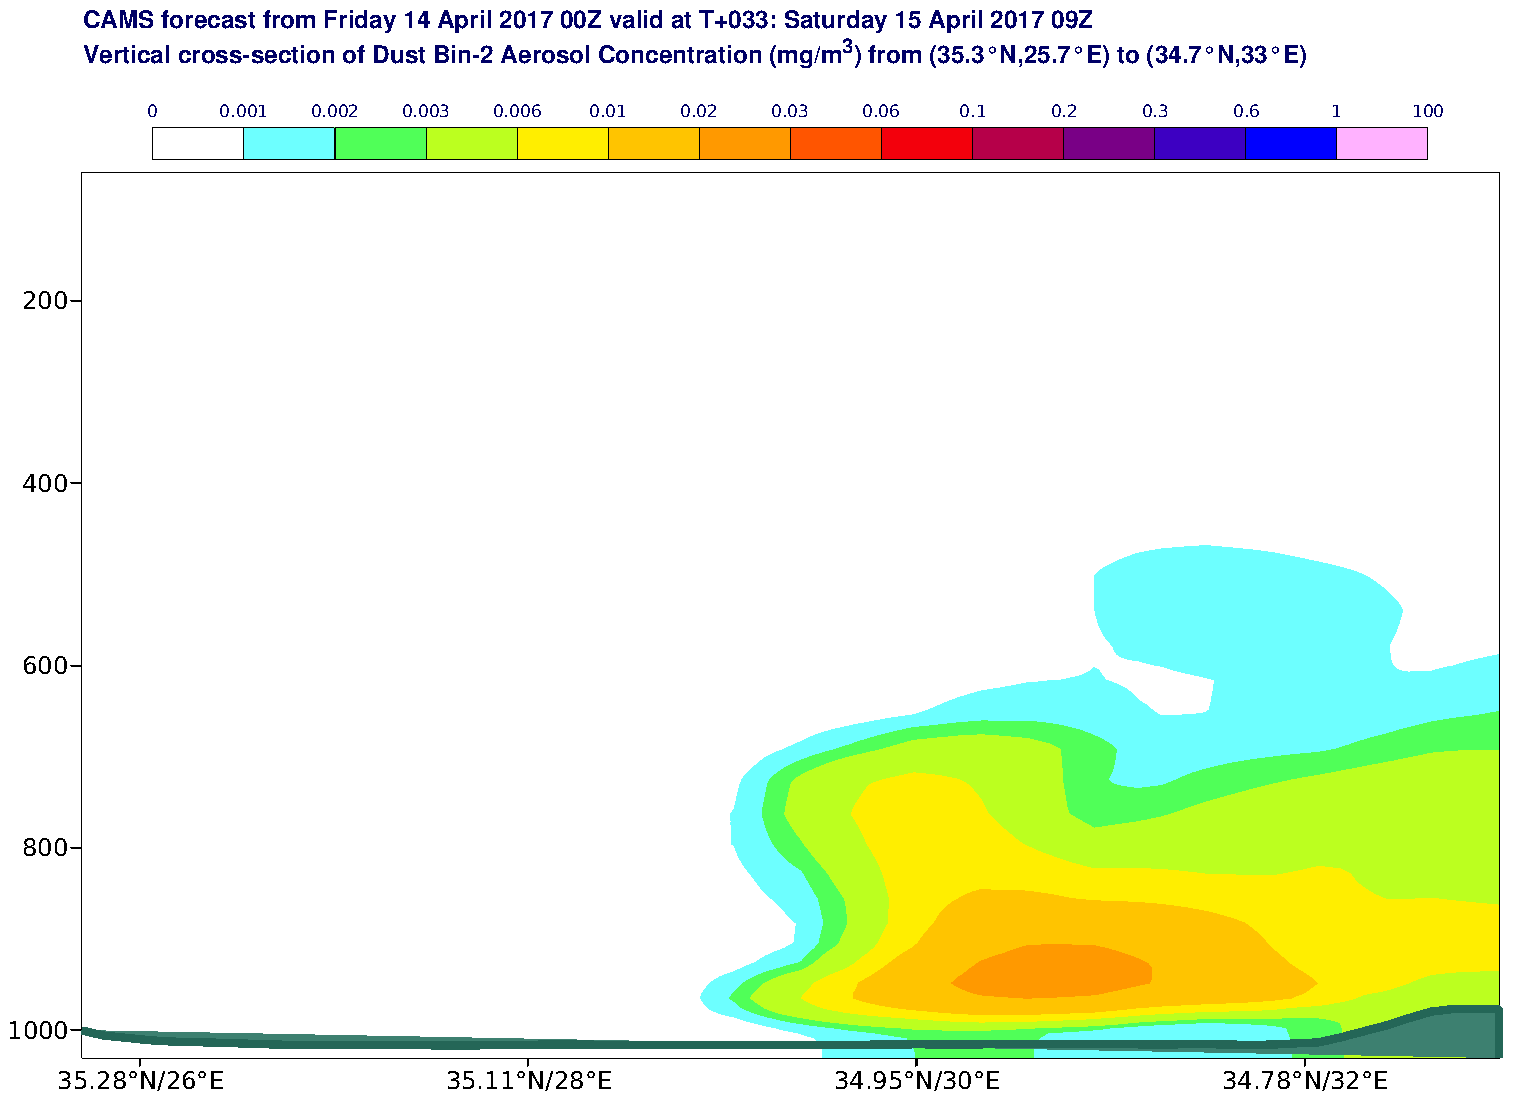 Vertical cross-section of Dust Bin-2 Aerosol Concentration (mg/m3) valid at T33 - 2017-04-15 09:00